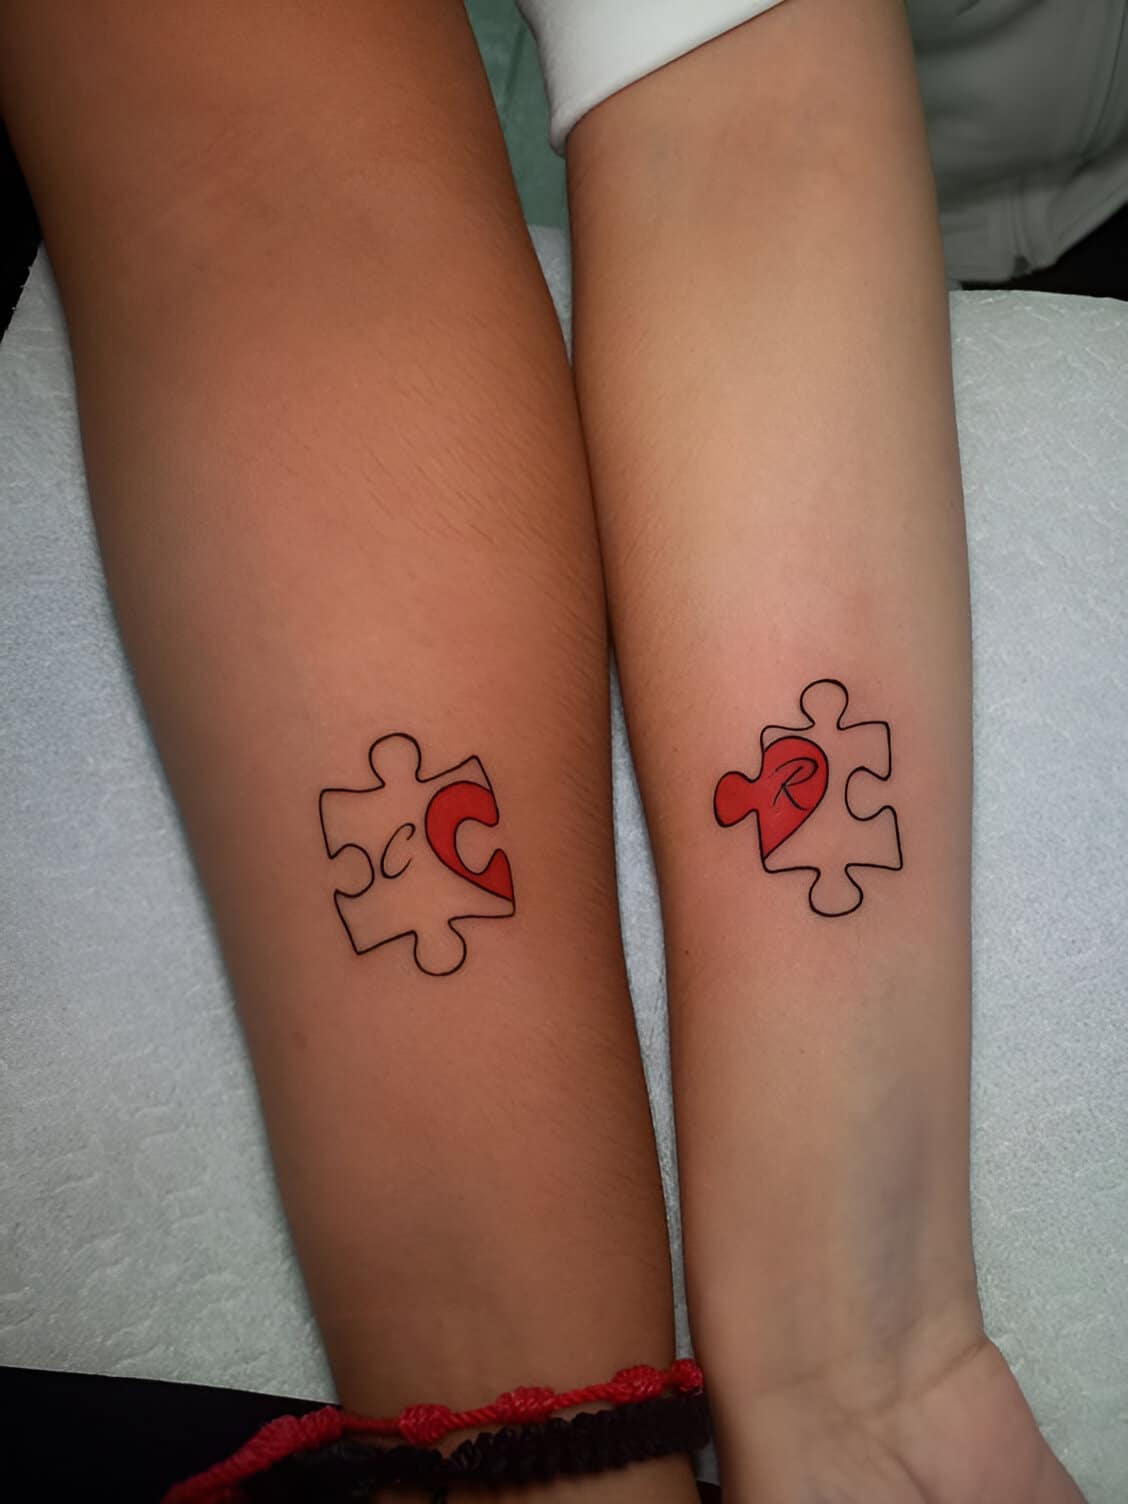 30 Elegant Matching Heart Tattoos To Get With Your Partner ASAP 7